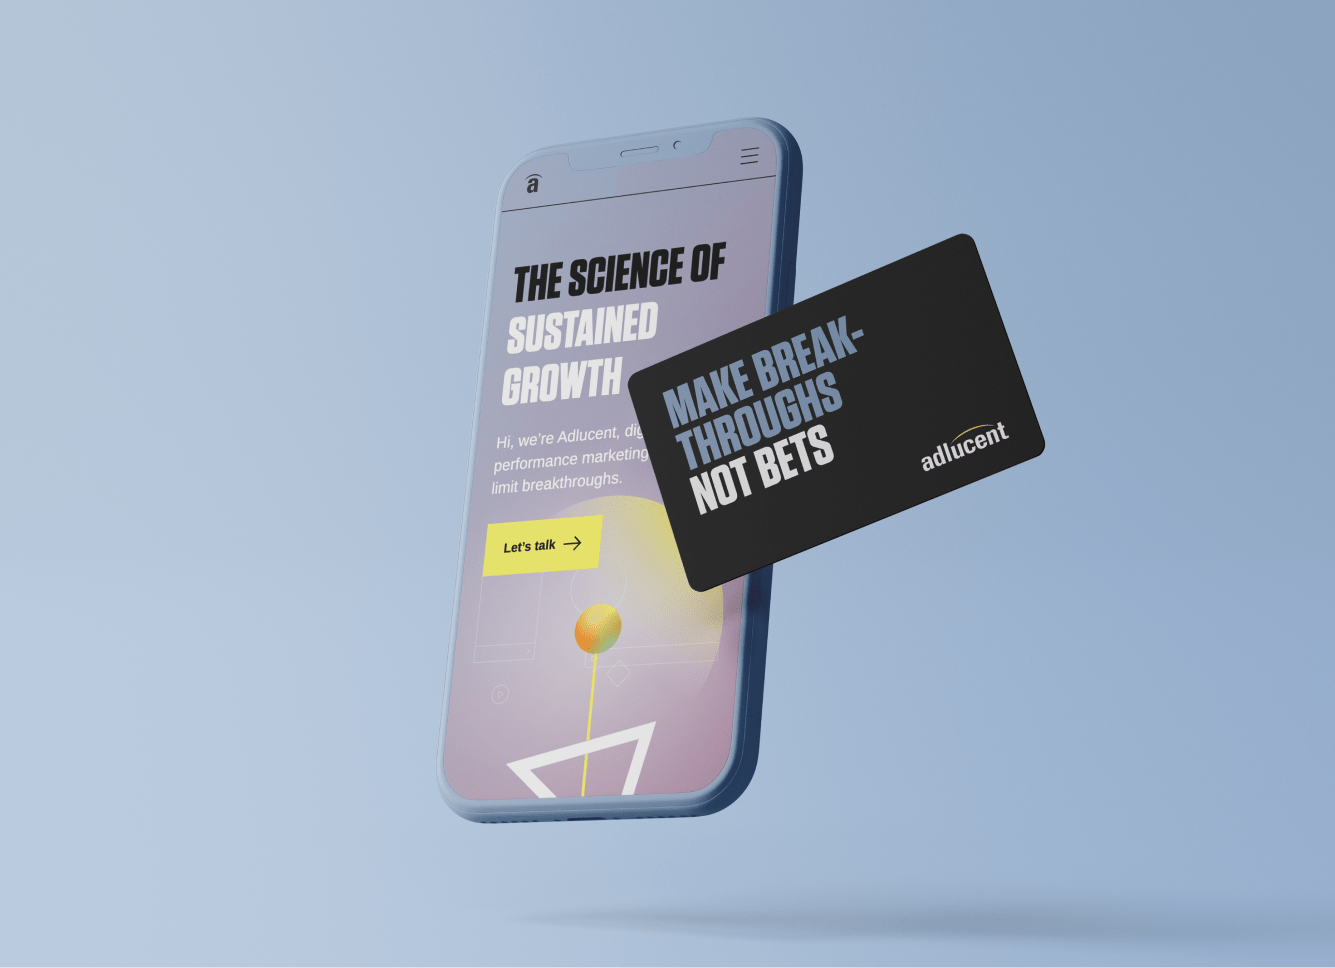 Render of a smartphone open to a webpage reading "The Science of Sustained Growth" and a render of a business card reading "Make Breakthroughs, not bets"